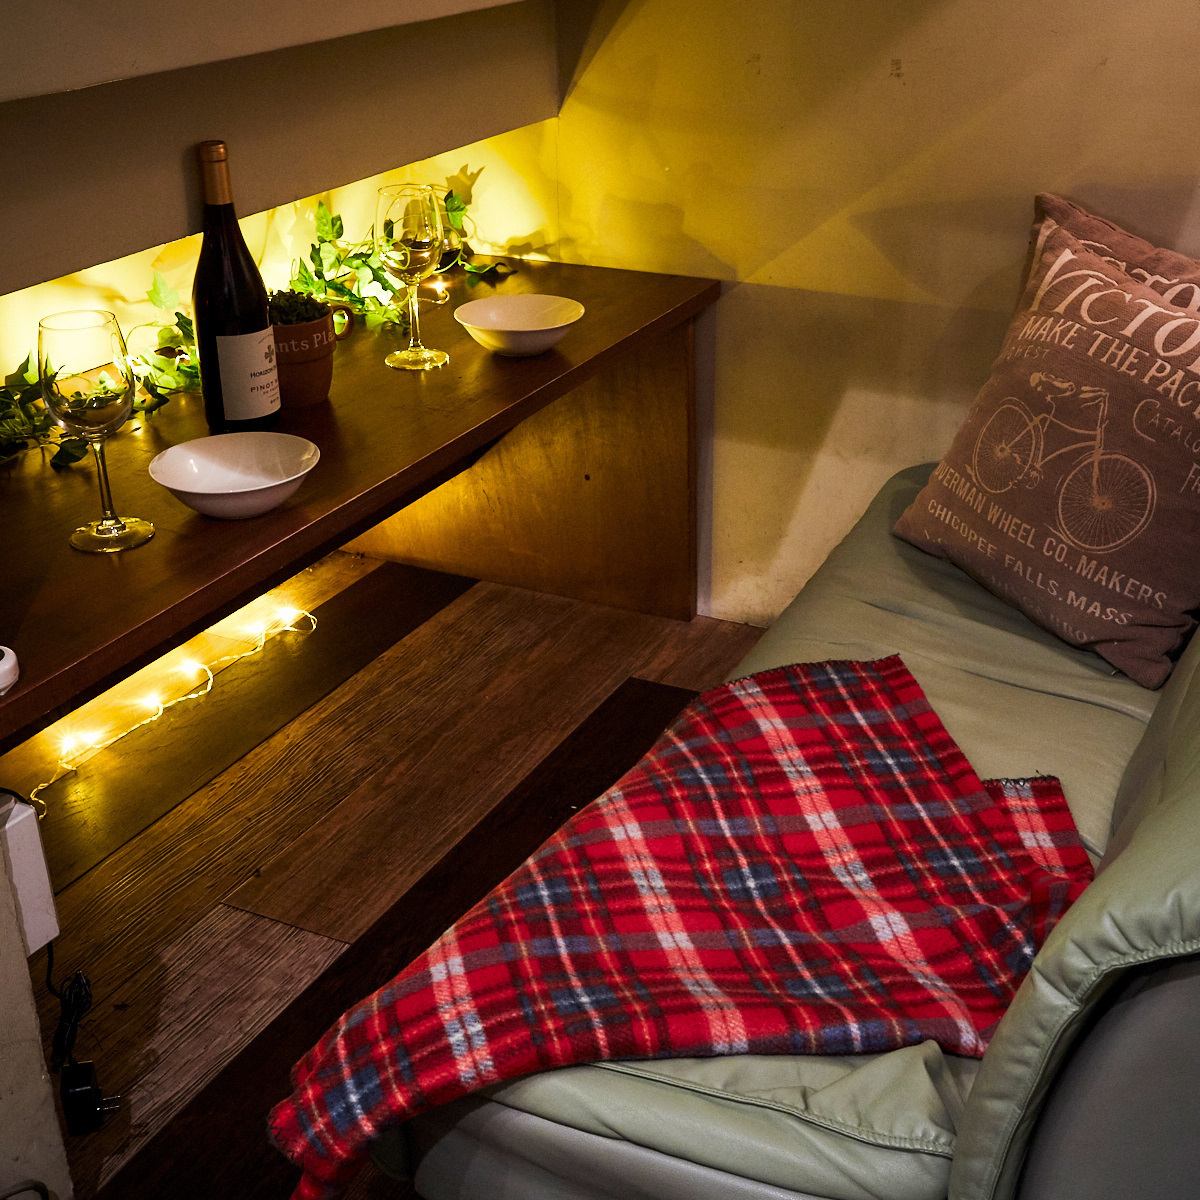 Excellent atmosphere! Sofa private room for 2 people ♪ For a special time ♪